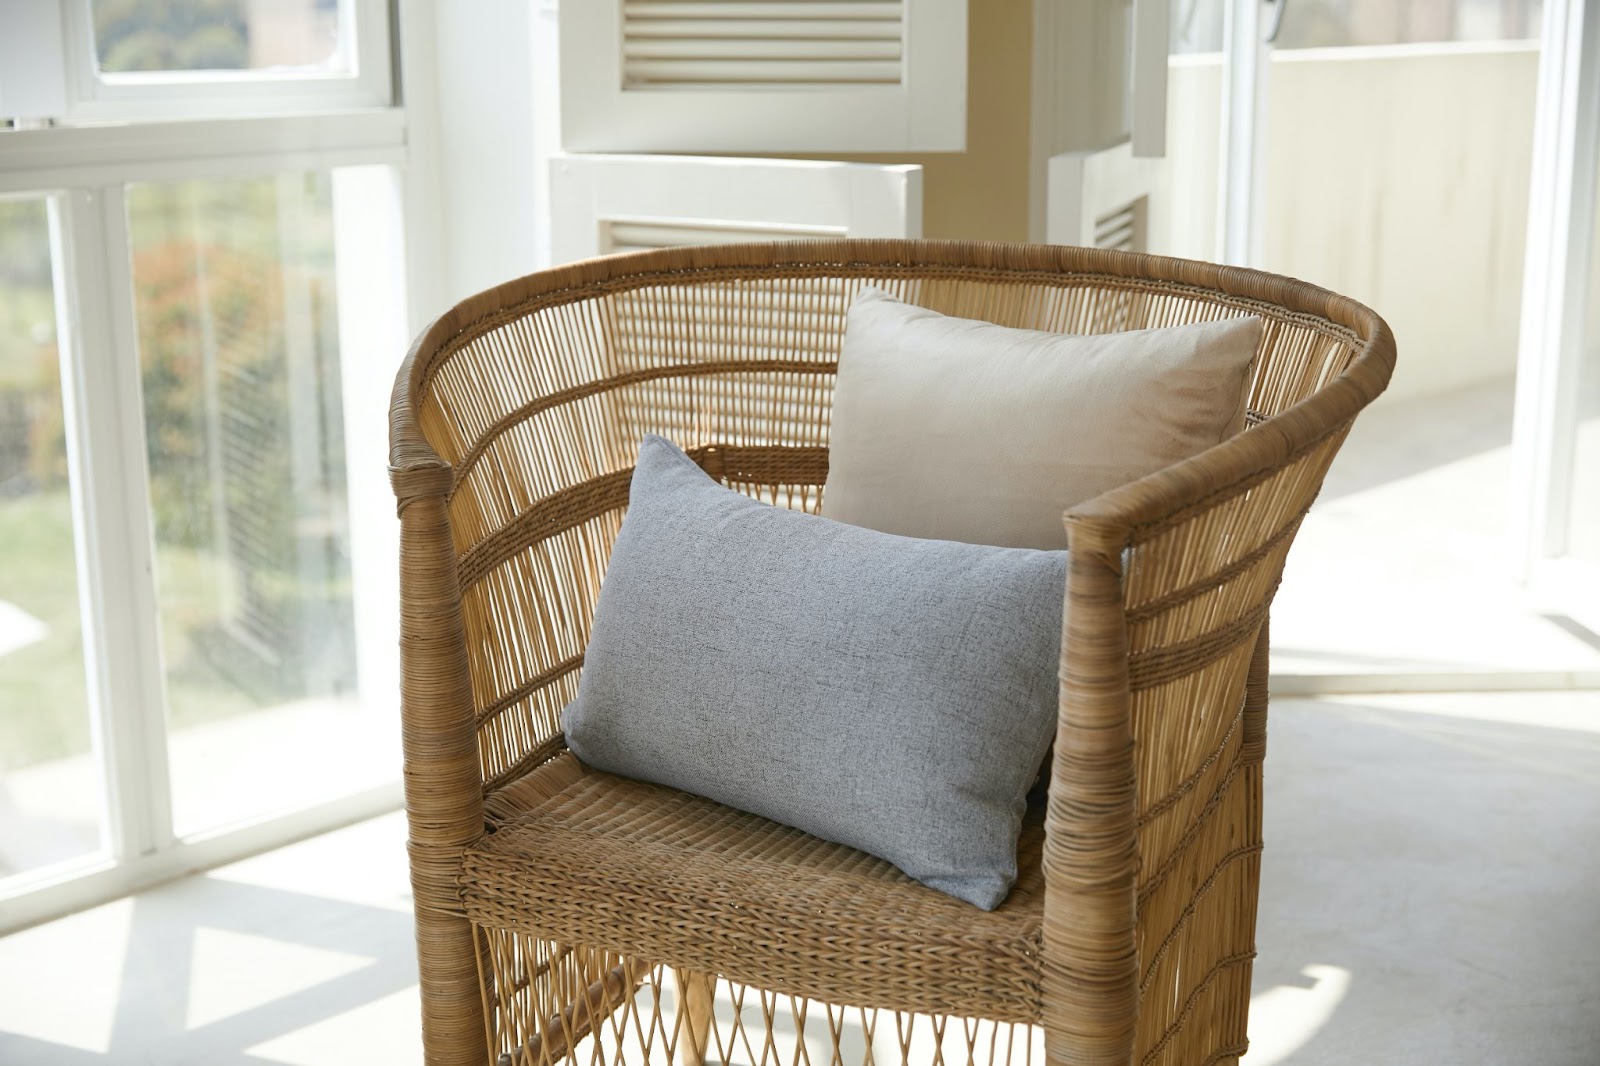 How Can You Tell If The Rattan Furniture Has A High Quality? 5 ...